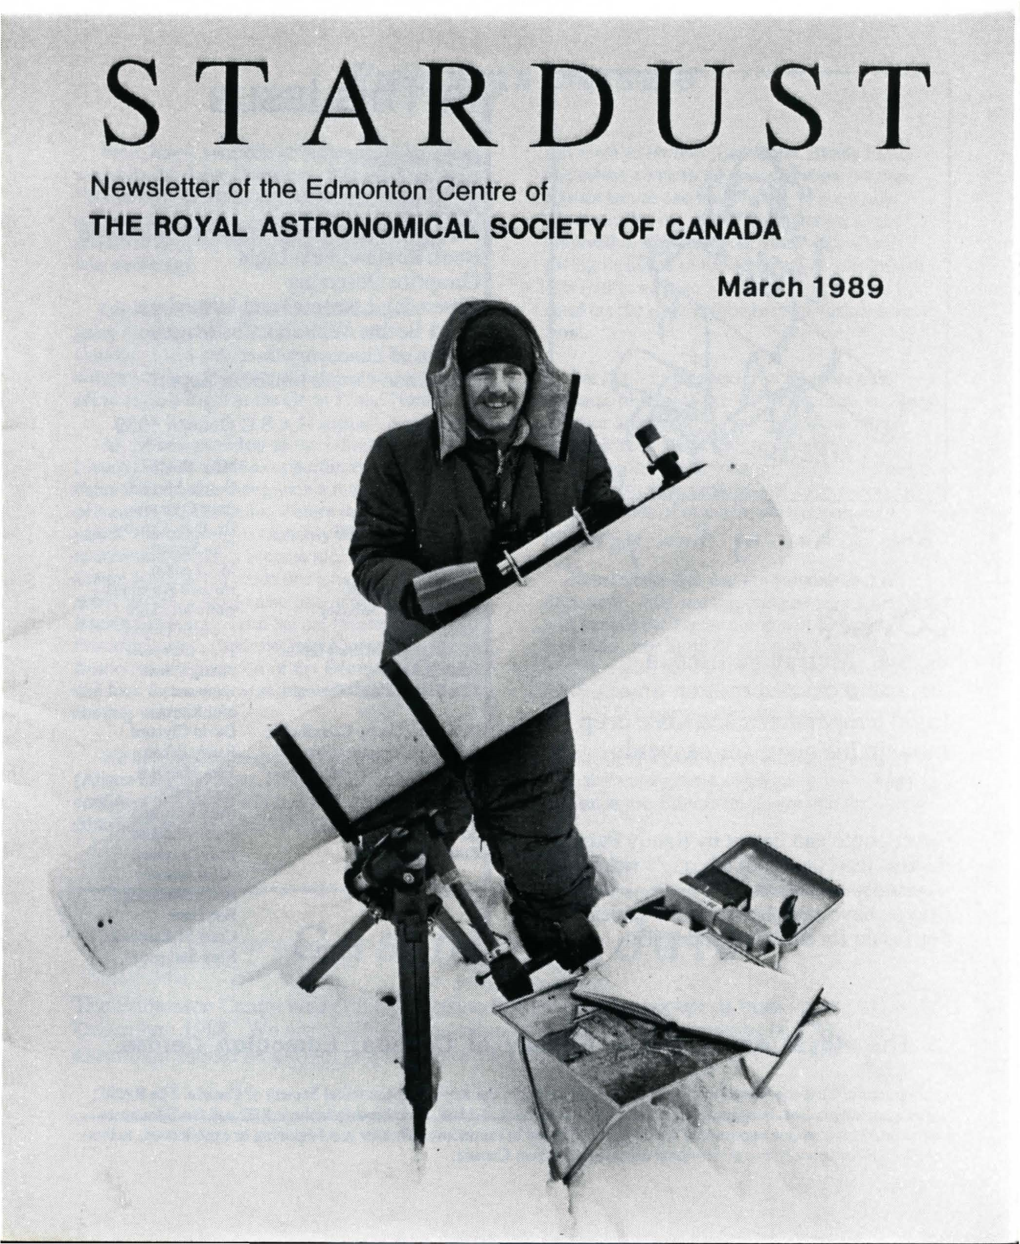 ST ARDUST Newsletter of the Edmonton Centre of the ROYAL ASTRONOMICAL SOCIETY of CANADA